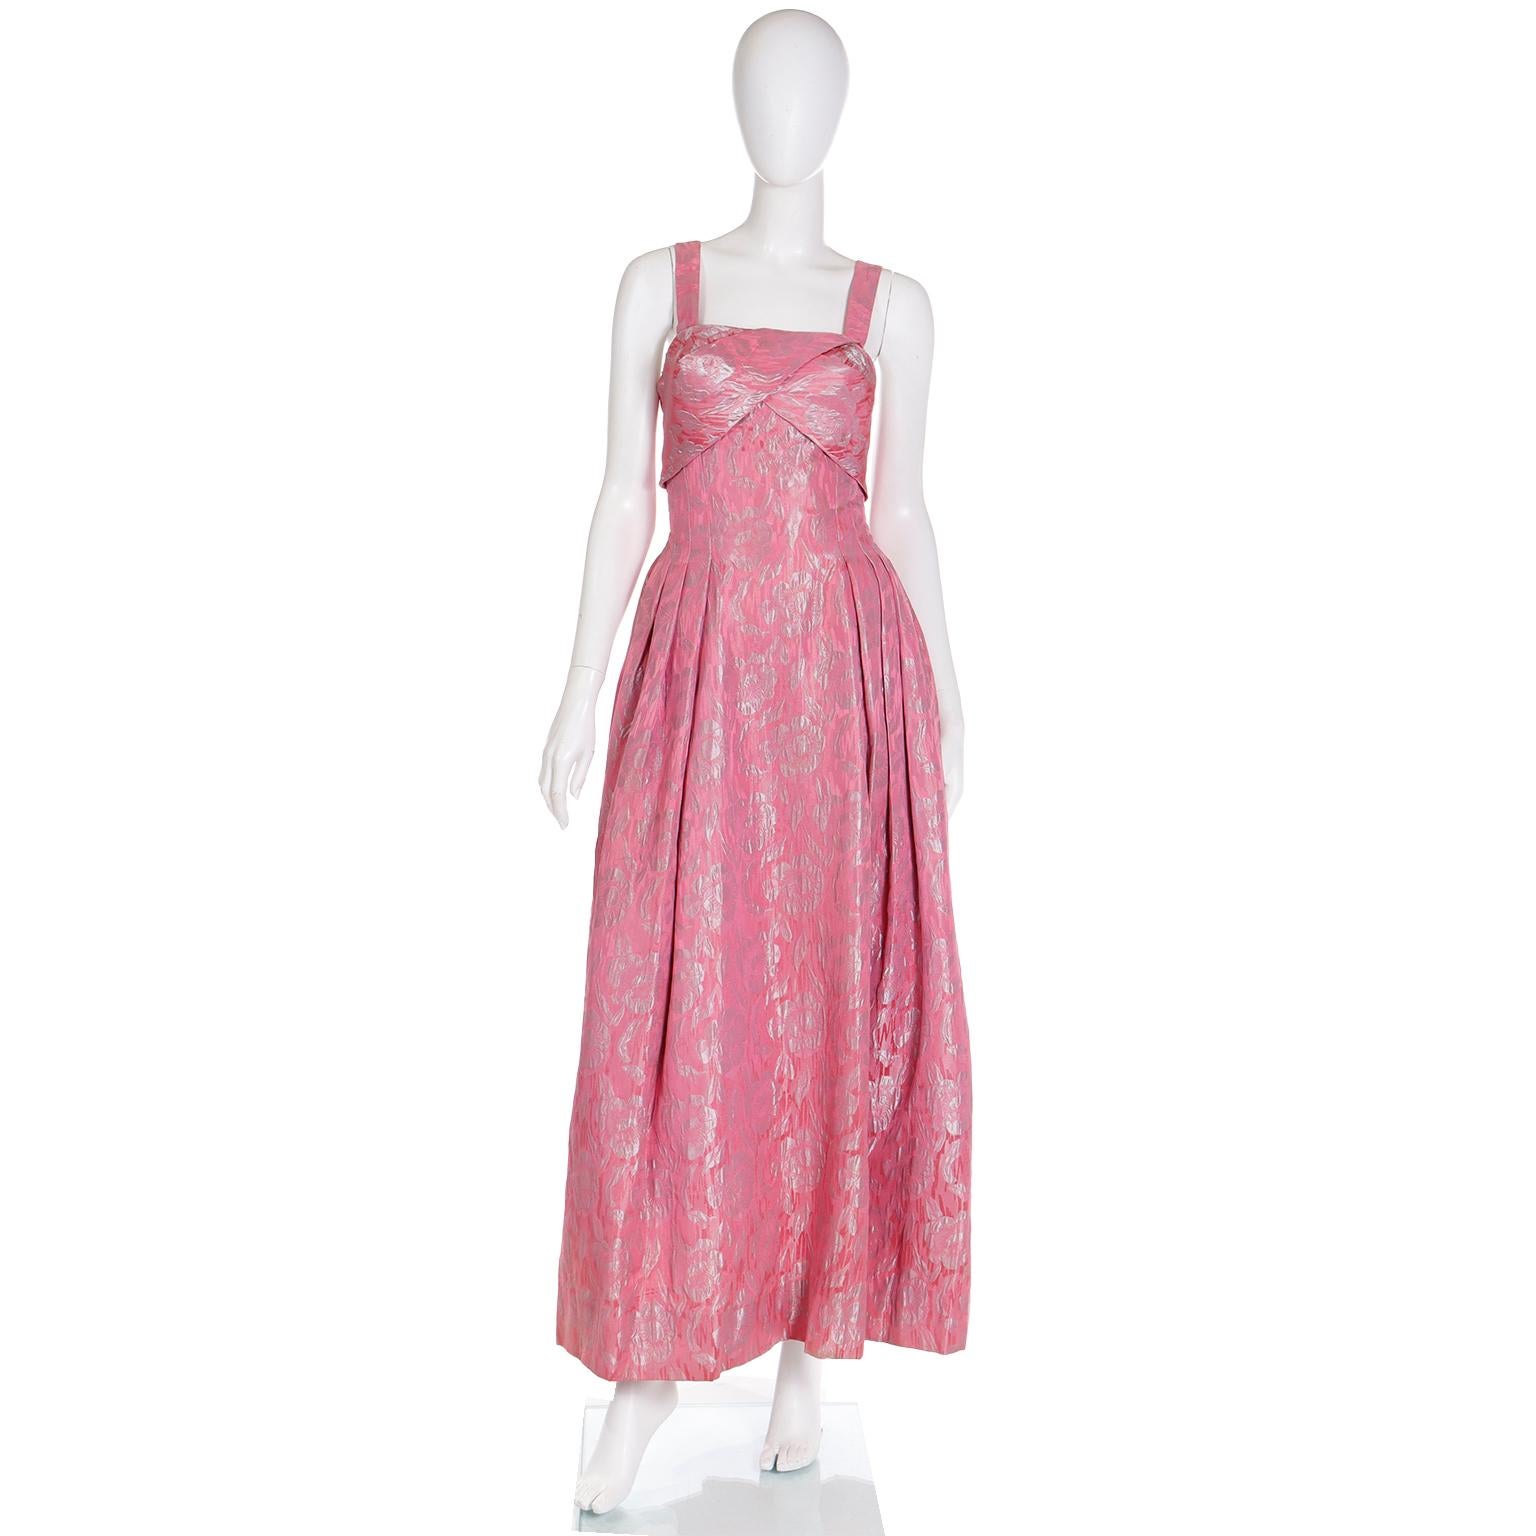 This lovely 1950s floor length vintage dress is by Norman Young, a London designer who designed special occasion and evening wear for high end boutiques.. The gorgeous jacquard print has a shimmering silver hue over the pink.  We especially love the